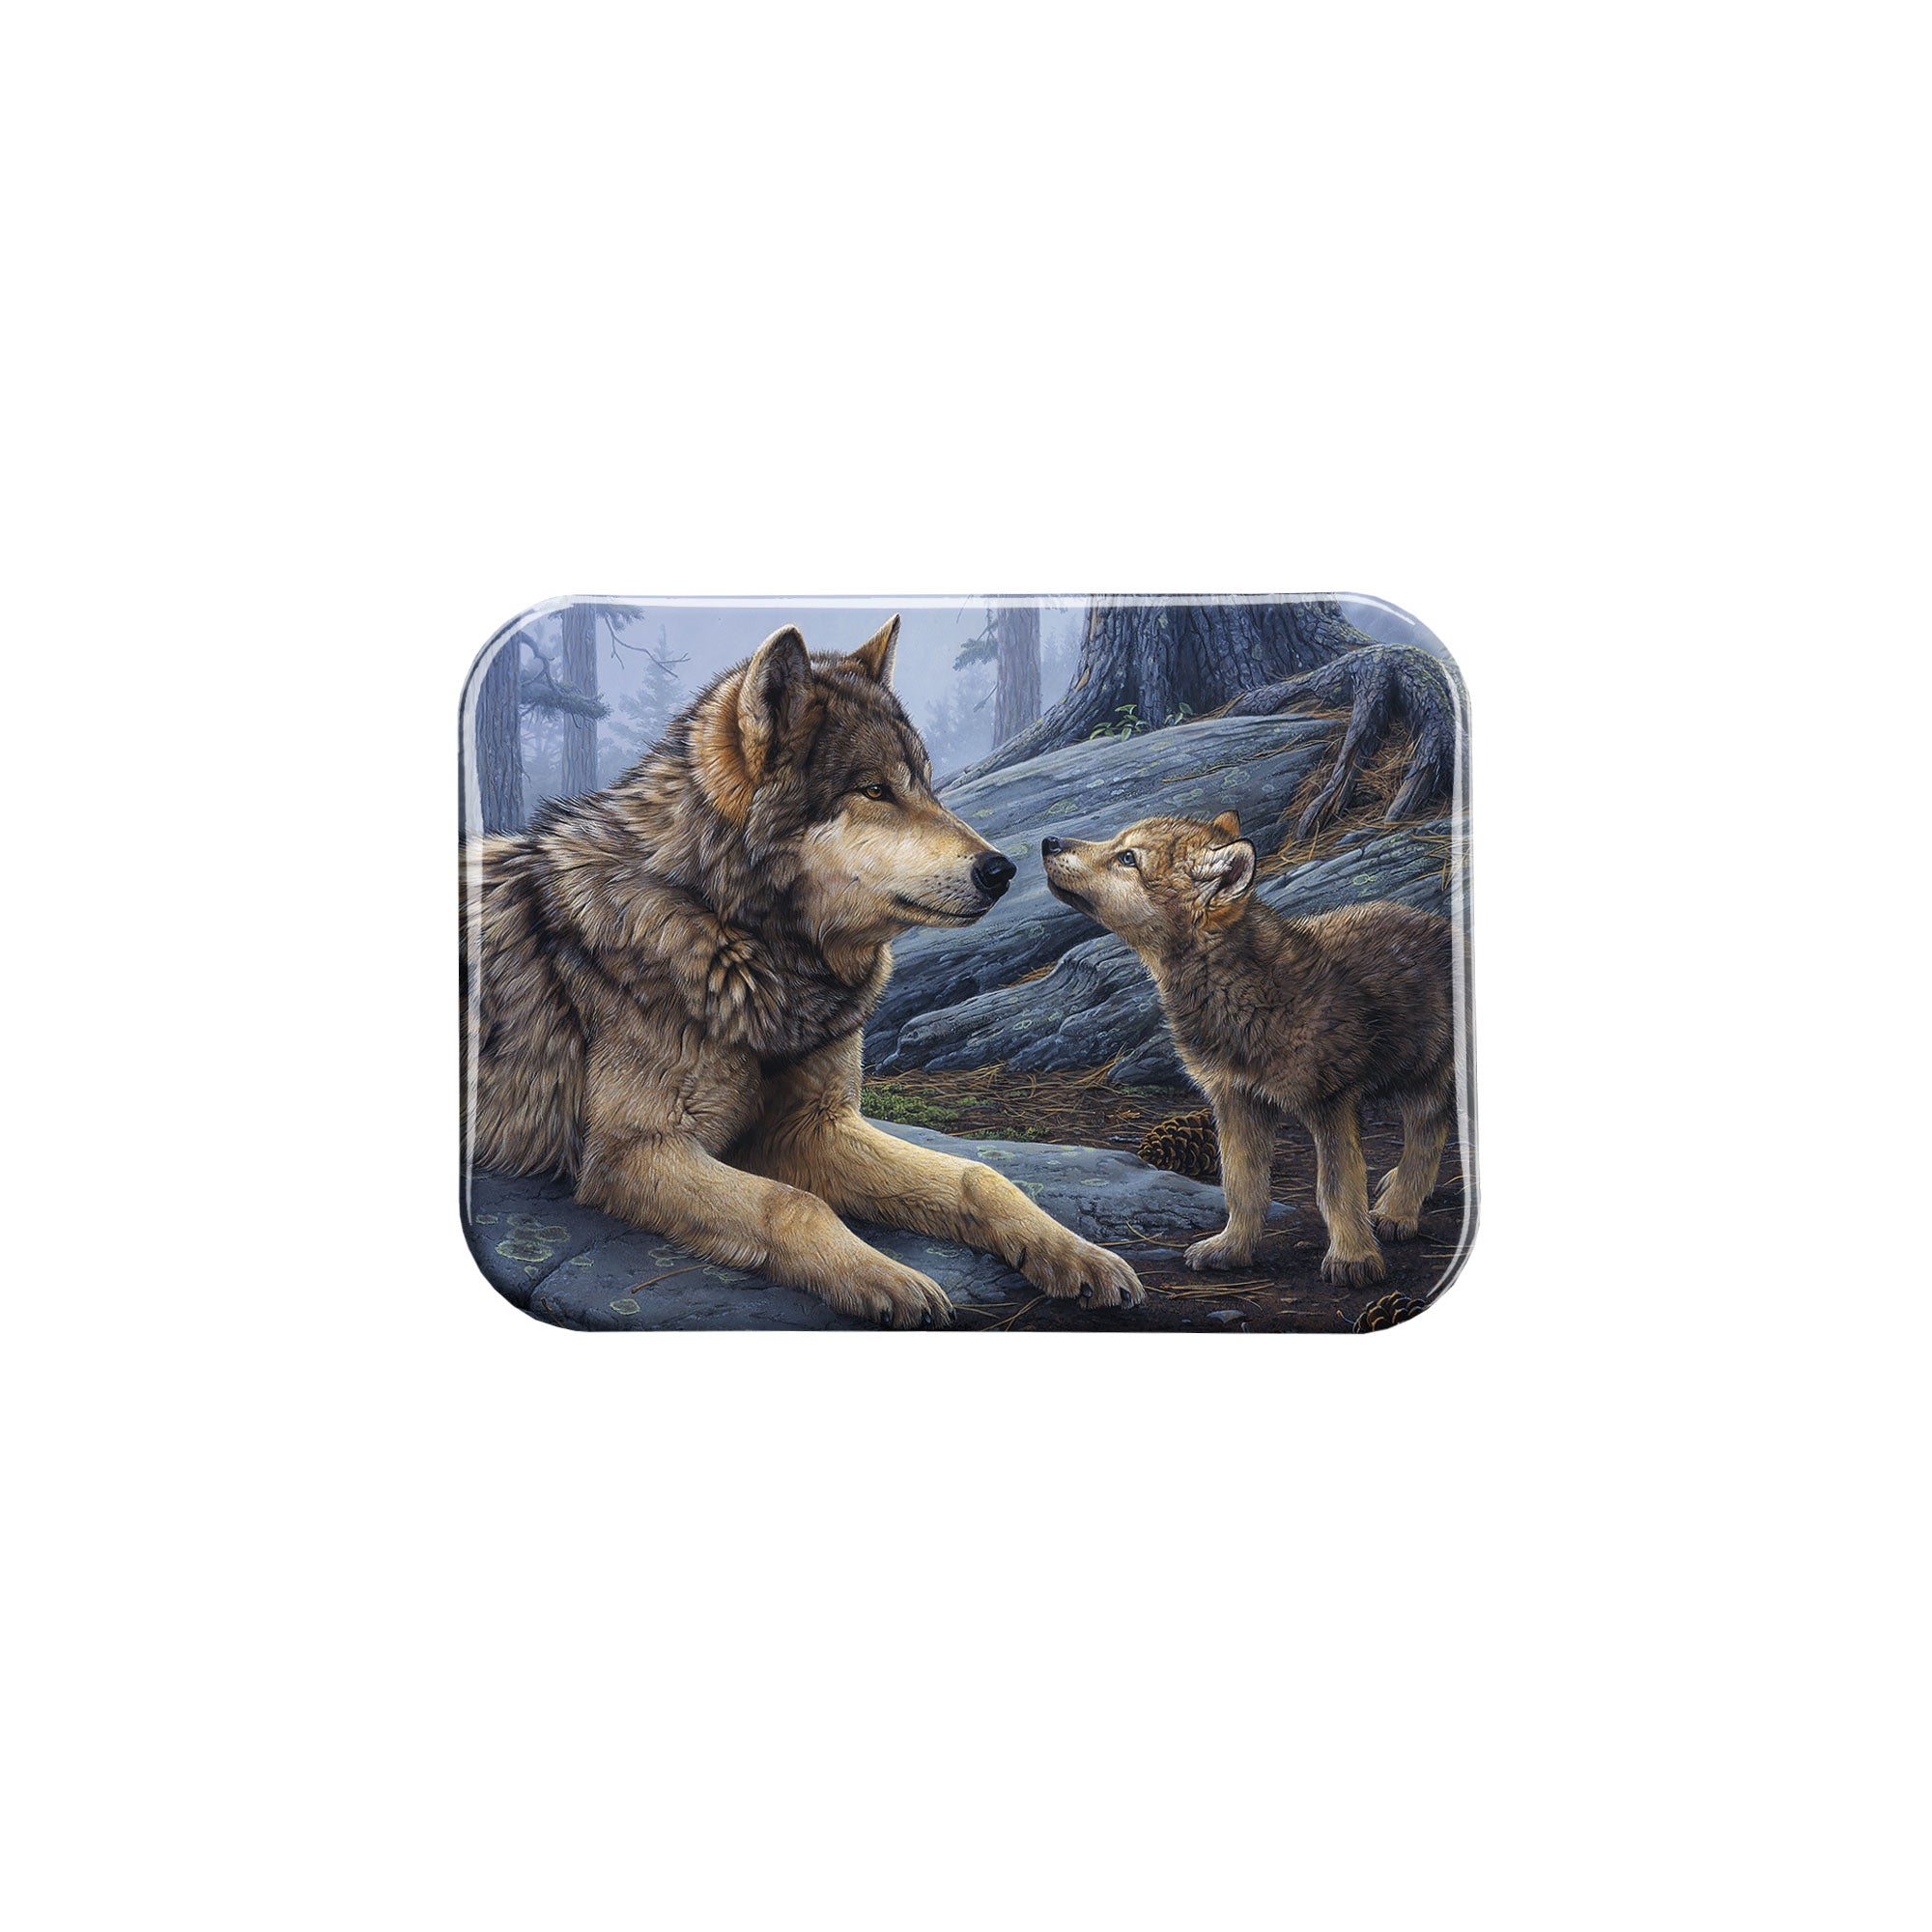 "Brother Wolf" - 2.5" X 3.5" Rectangle Fridge Magnets